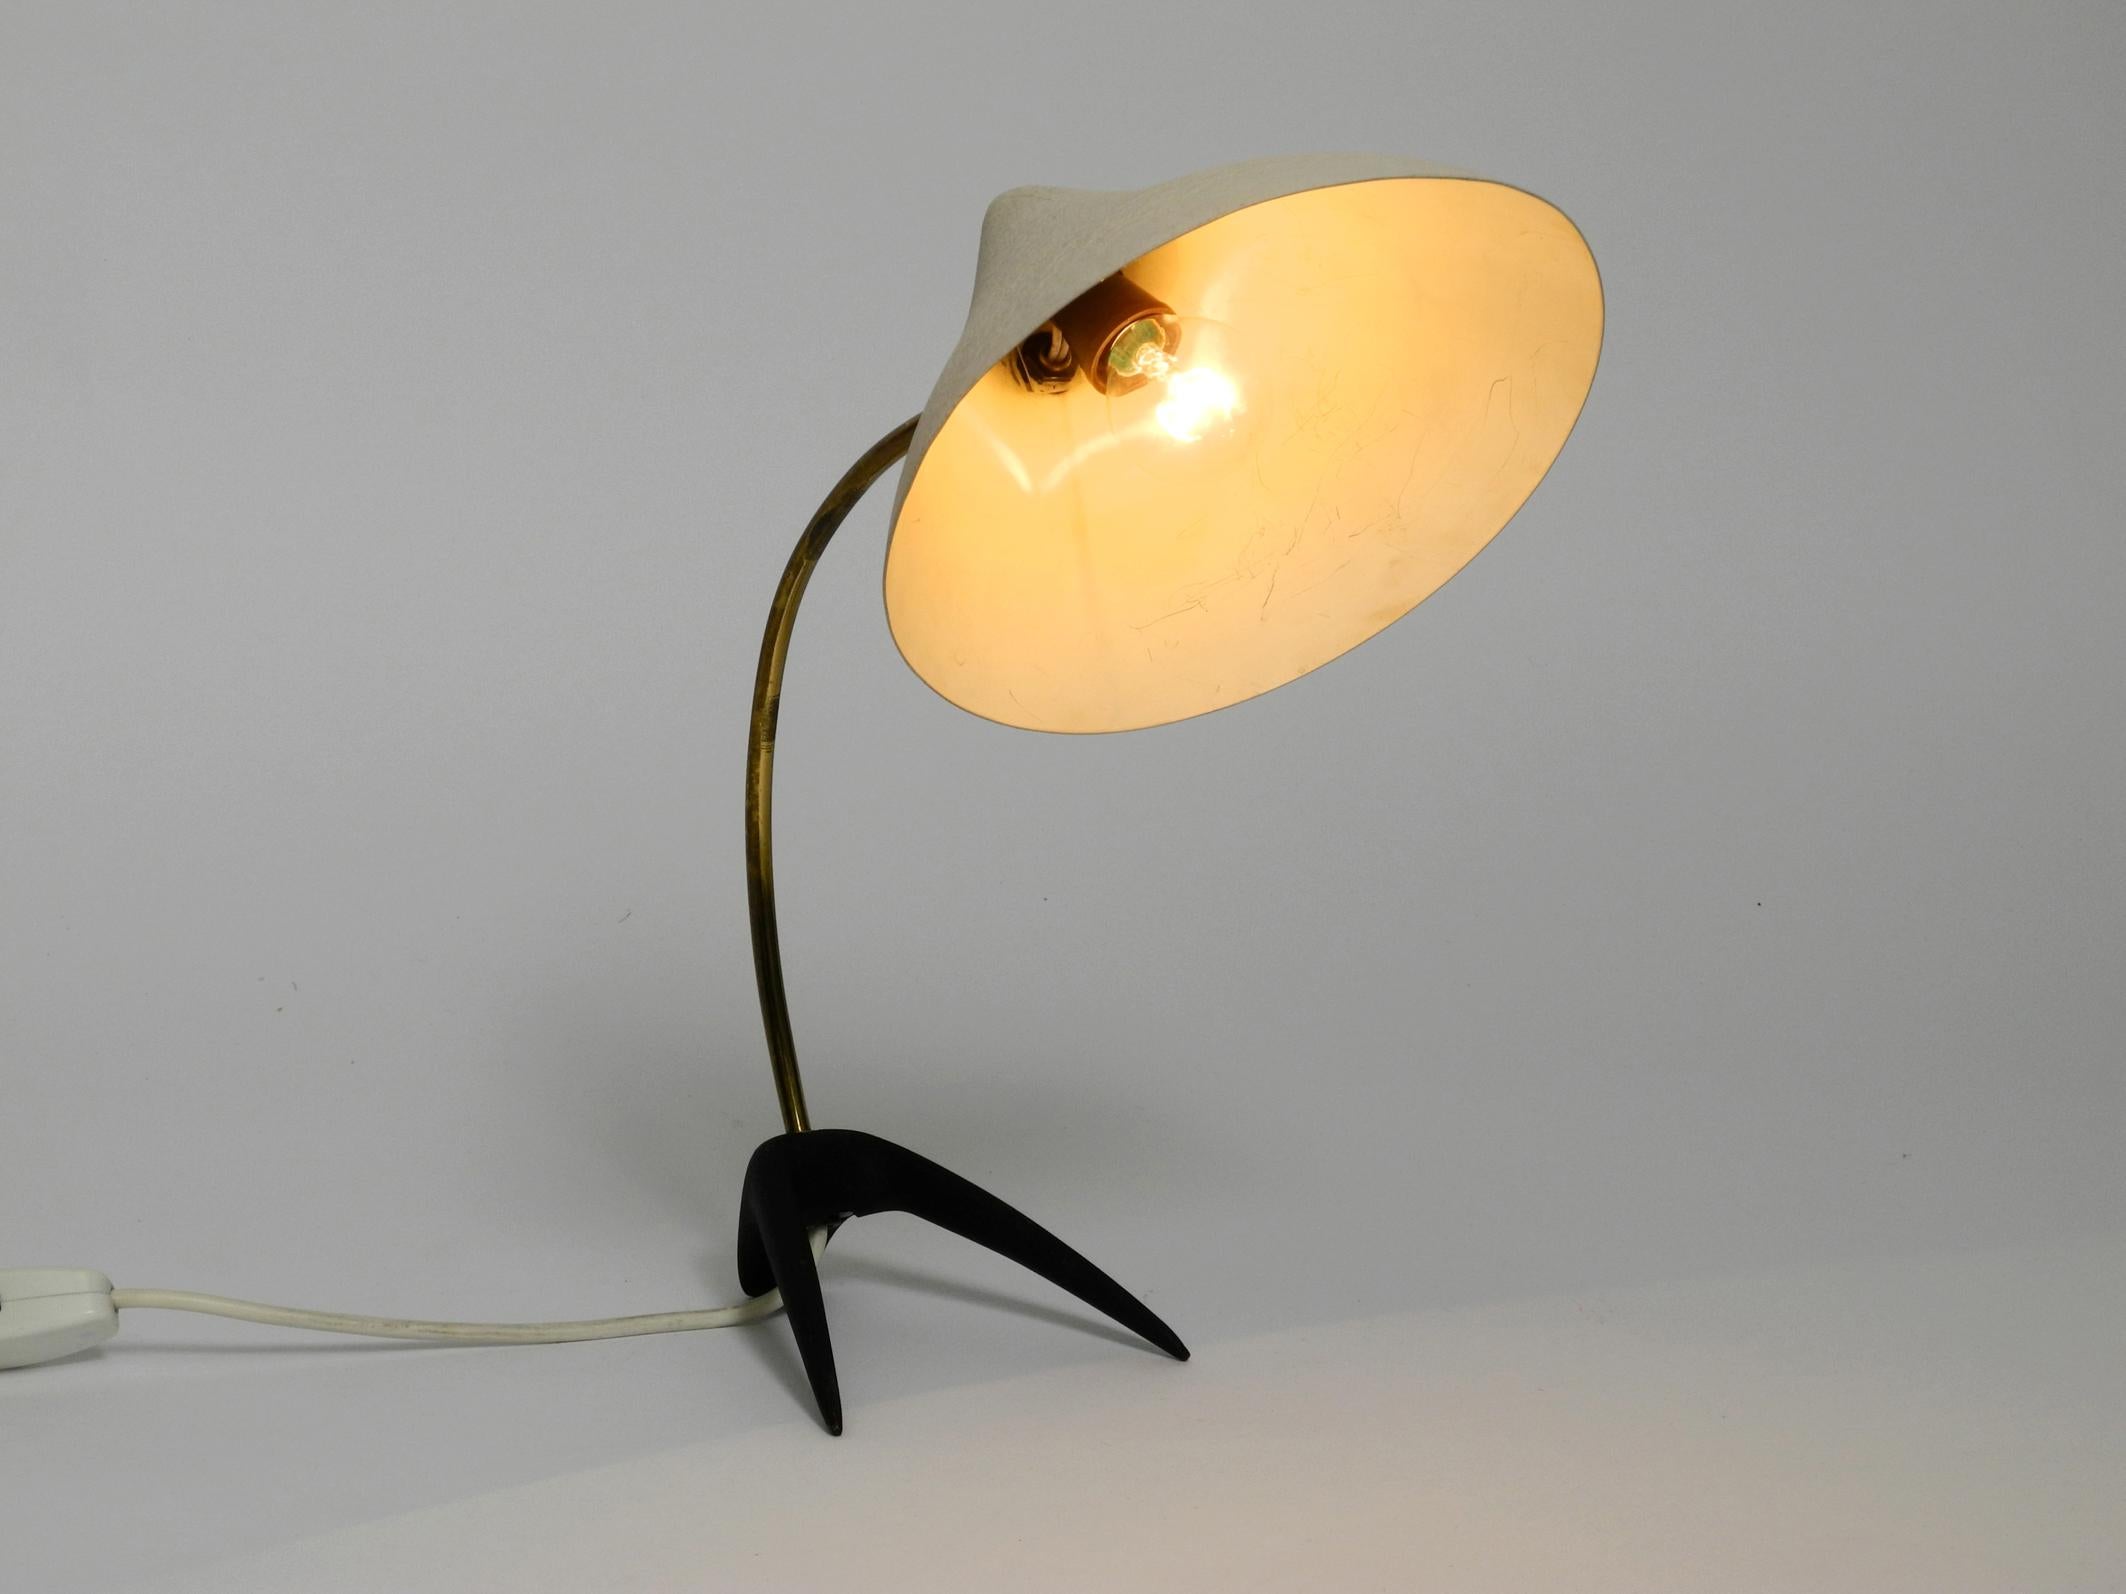 Rare beautiful Louis Kalff mid century crow's foot table lamp for Cosack.
Beautiful design with a movable cone lampshade.
Aluminum lampshade, brass neck and metal base with black shrink varnish.
Great patina with very minor signs of wear.
Slight